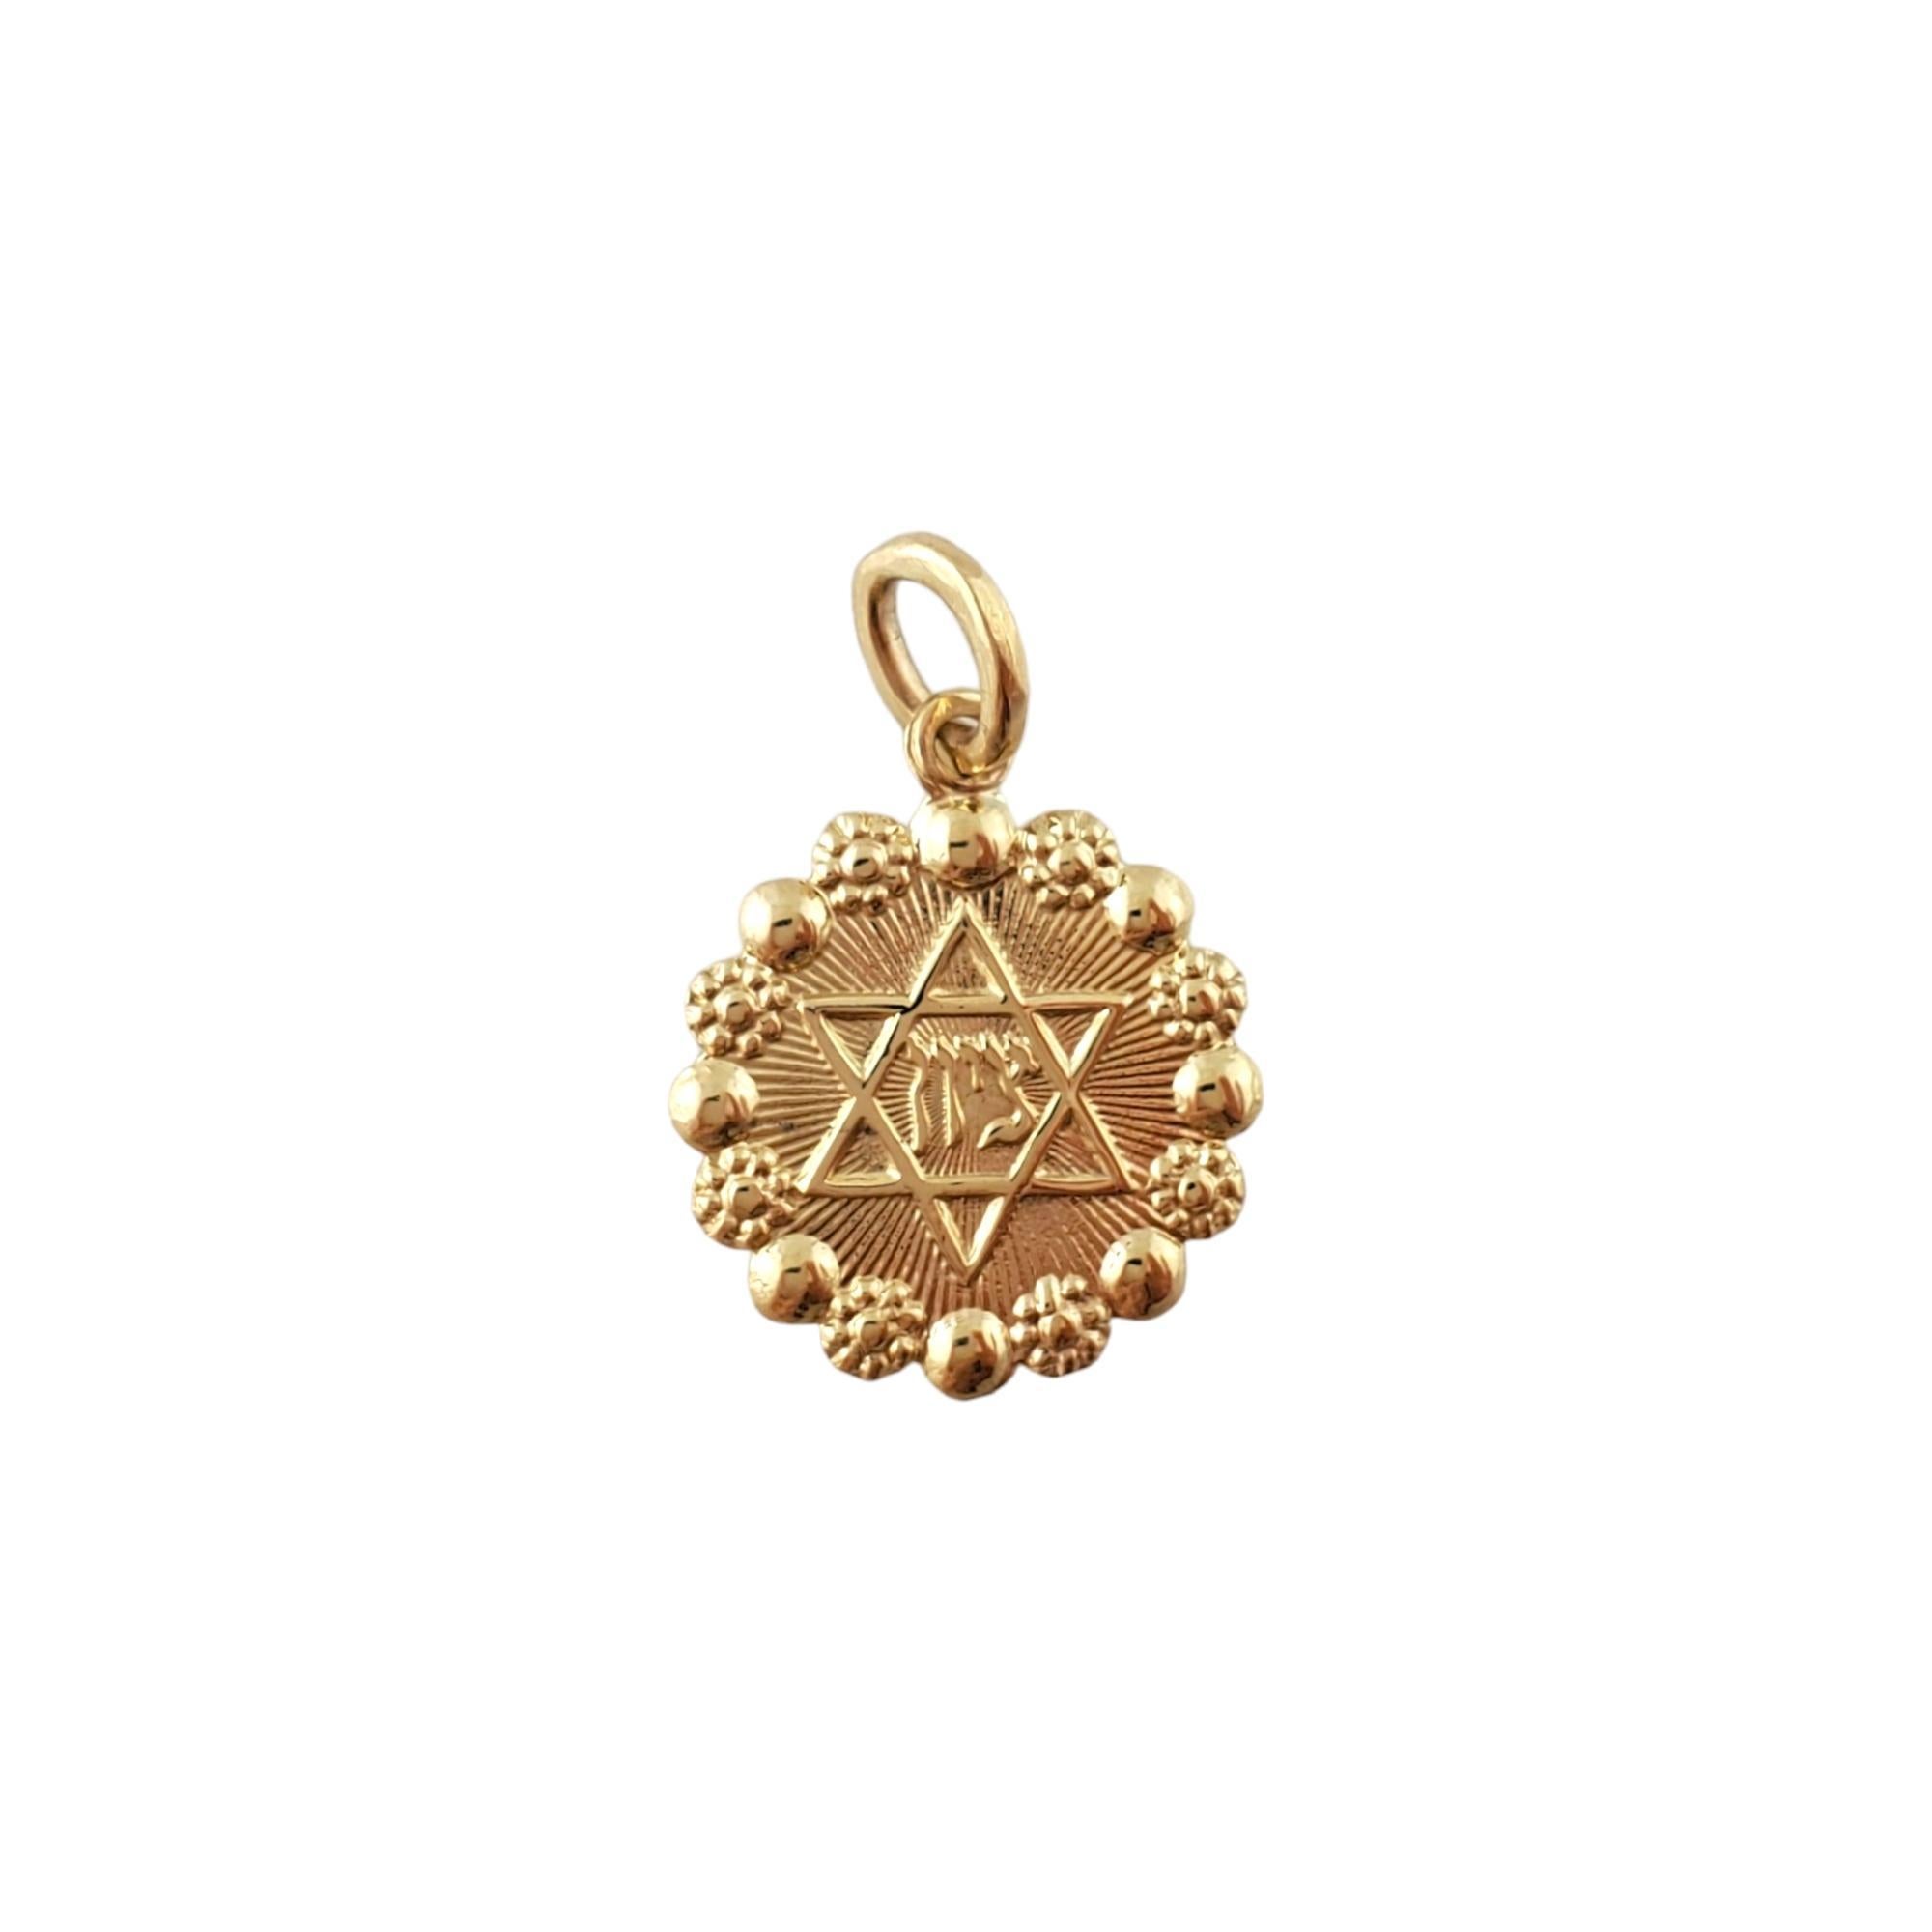 Vintage 14K Yellow Gold Star of David Charm -

This Star of David Charm is a symbol of faith and is crafted in meticulously detailed 14K yellow gold. 

Size: 19.13mm X 13.23mm

Weight: 0.6 dwt/ 0.9 g

Hallmark: 14K

Very good condition,